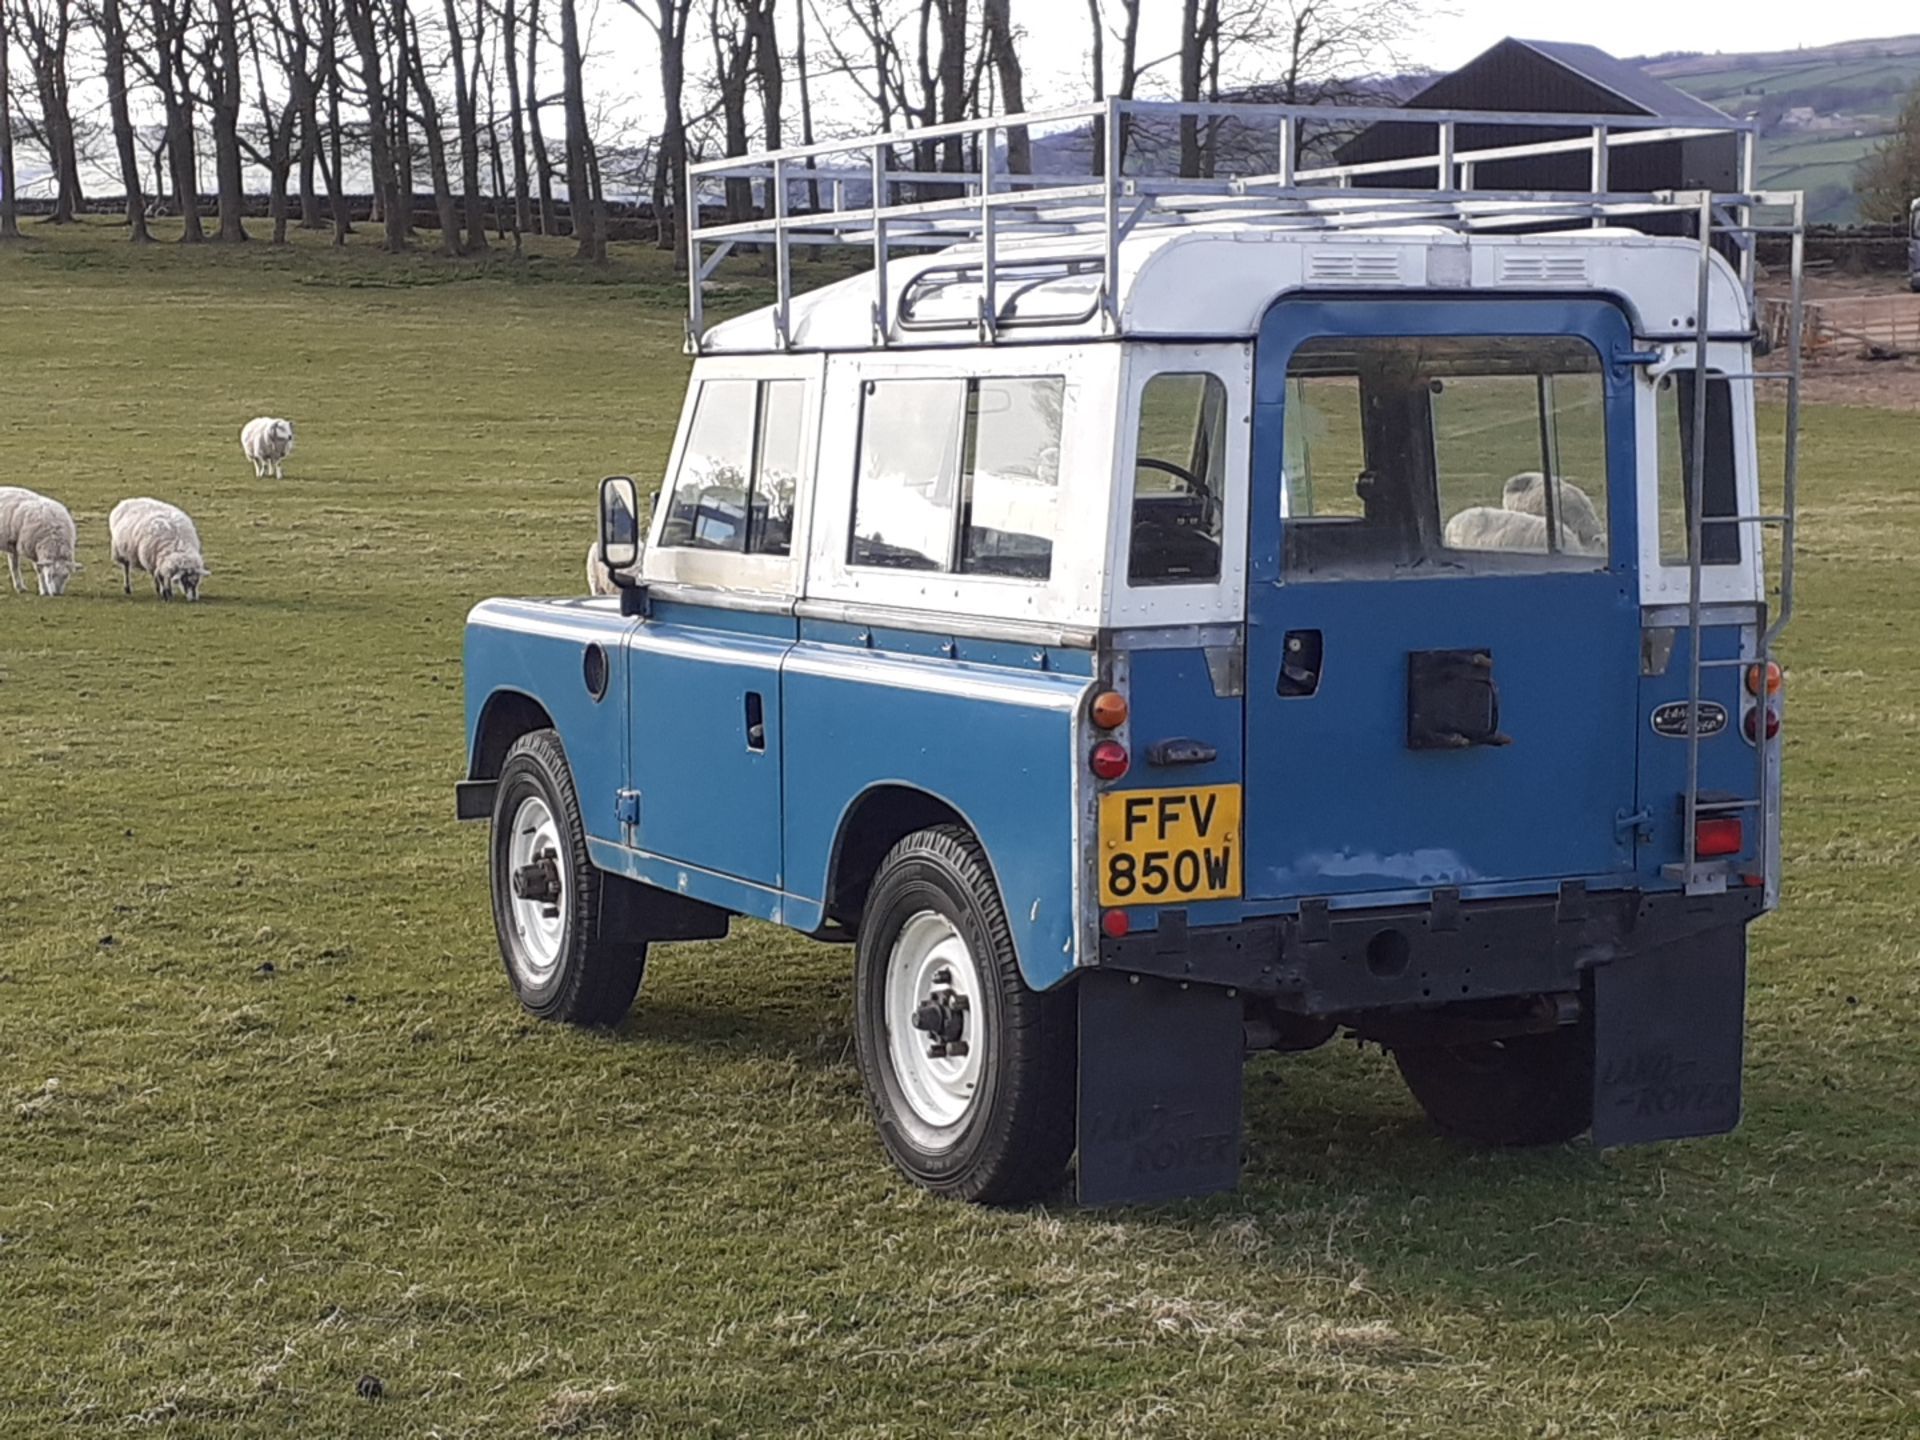 1980 LAND ROVER SERIES III CLASSIC STATION WAGON, TAX AND MOT EXEMPT *NO VAT* - Image 10 of 22